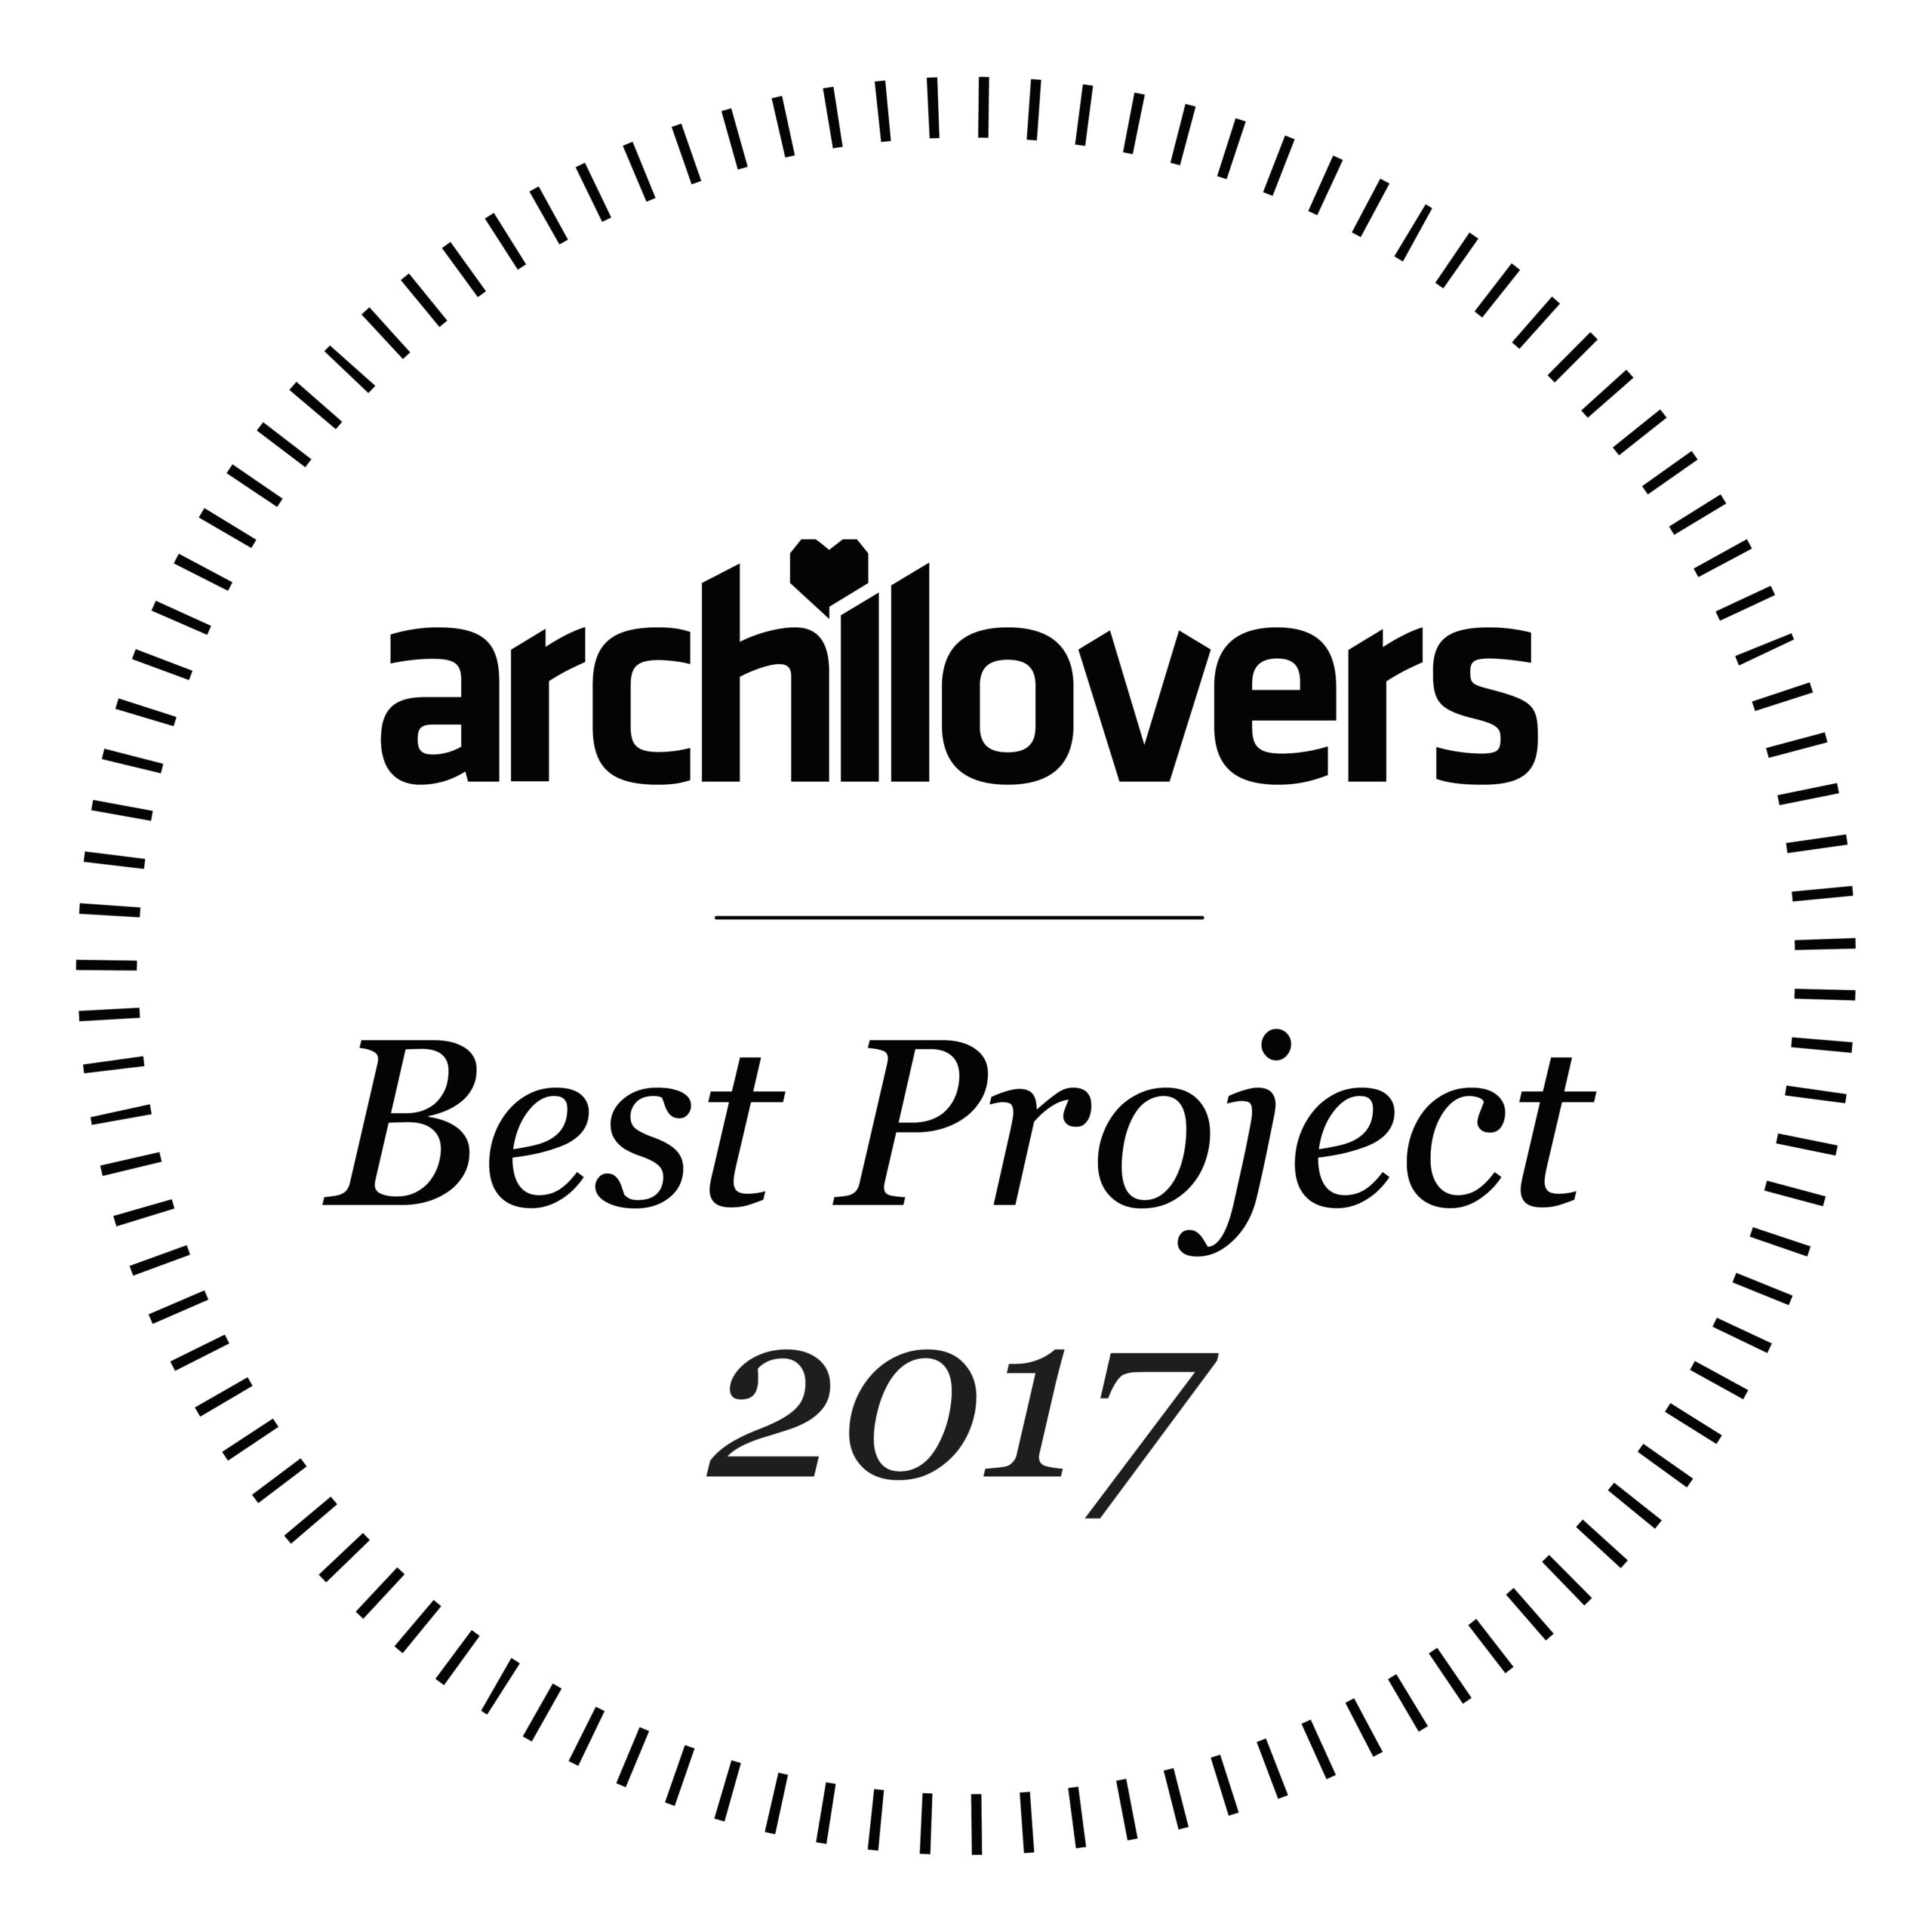 The Sleeping Attic is Best Project 2017 for Archilovers